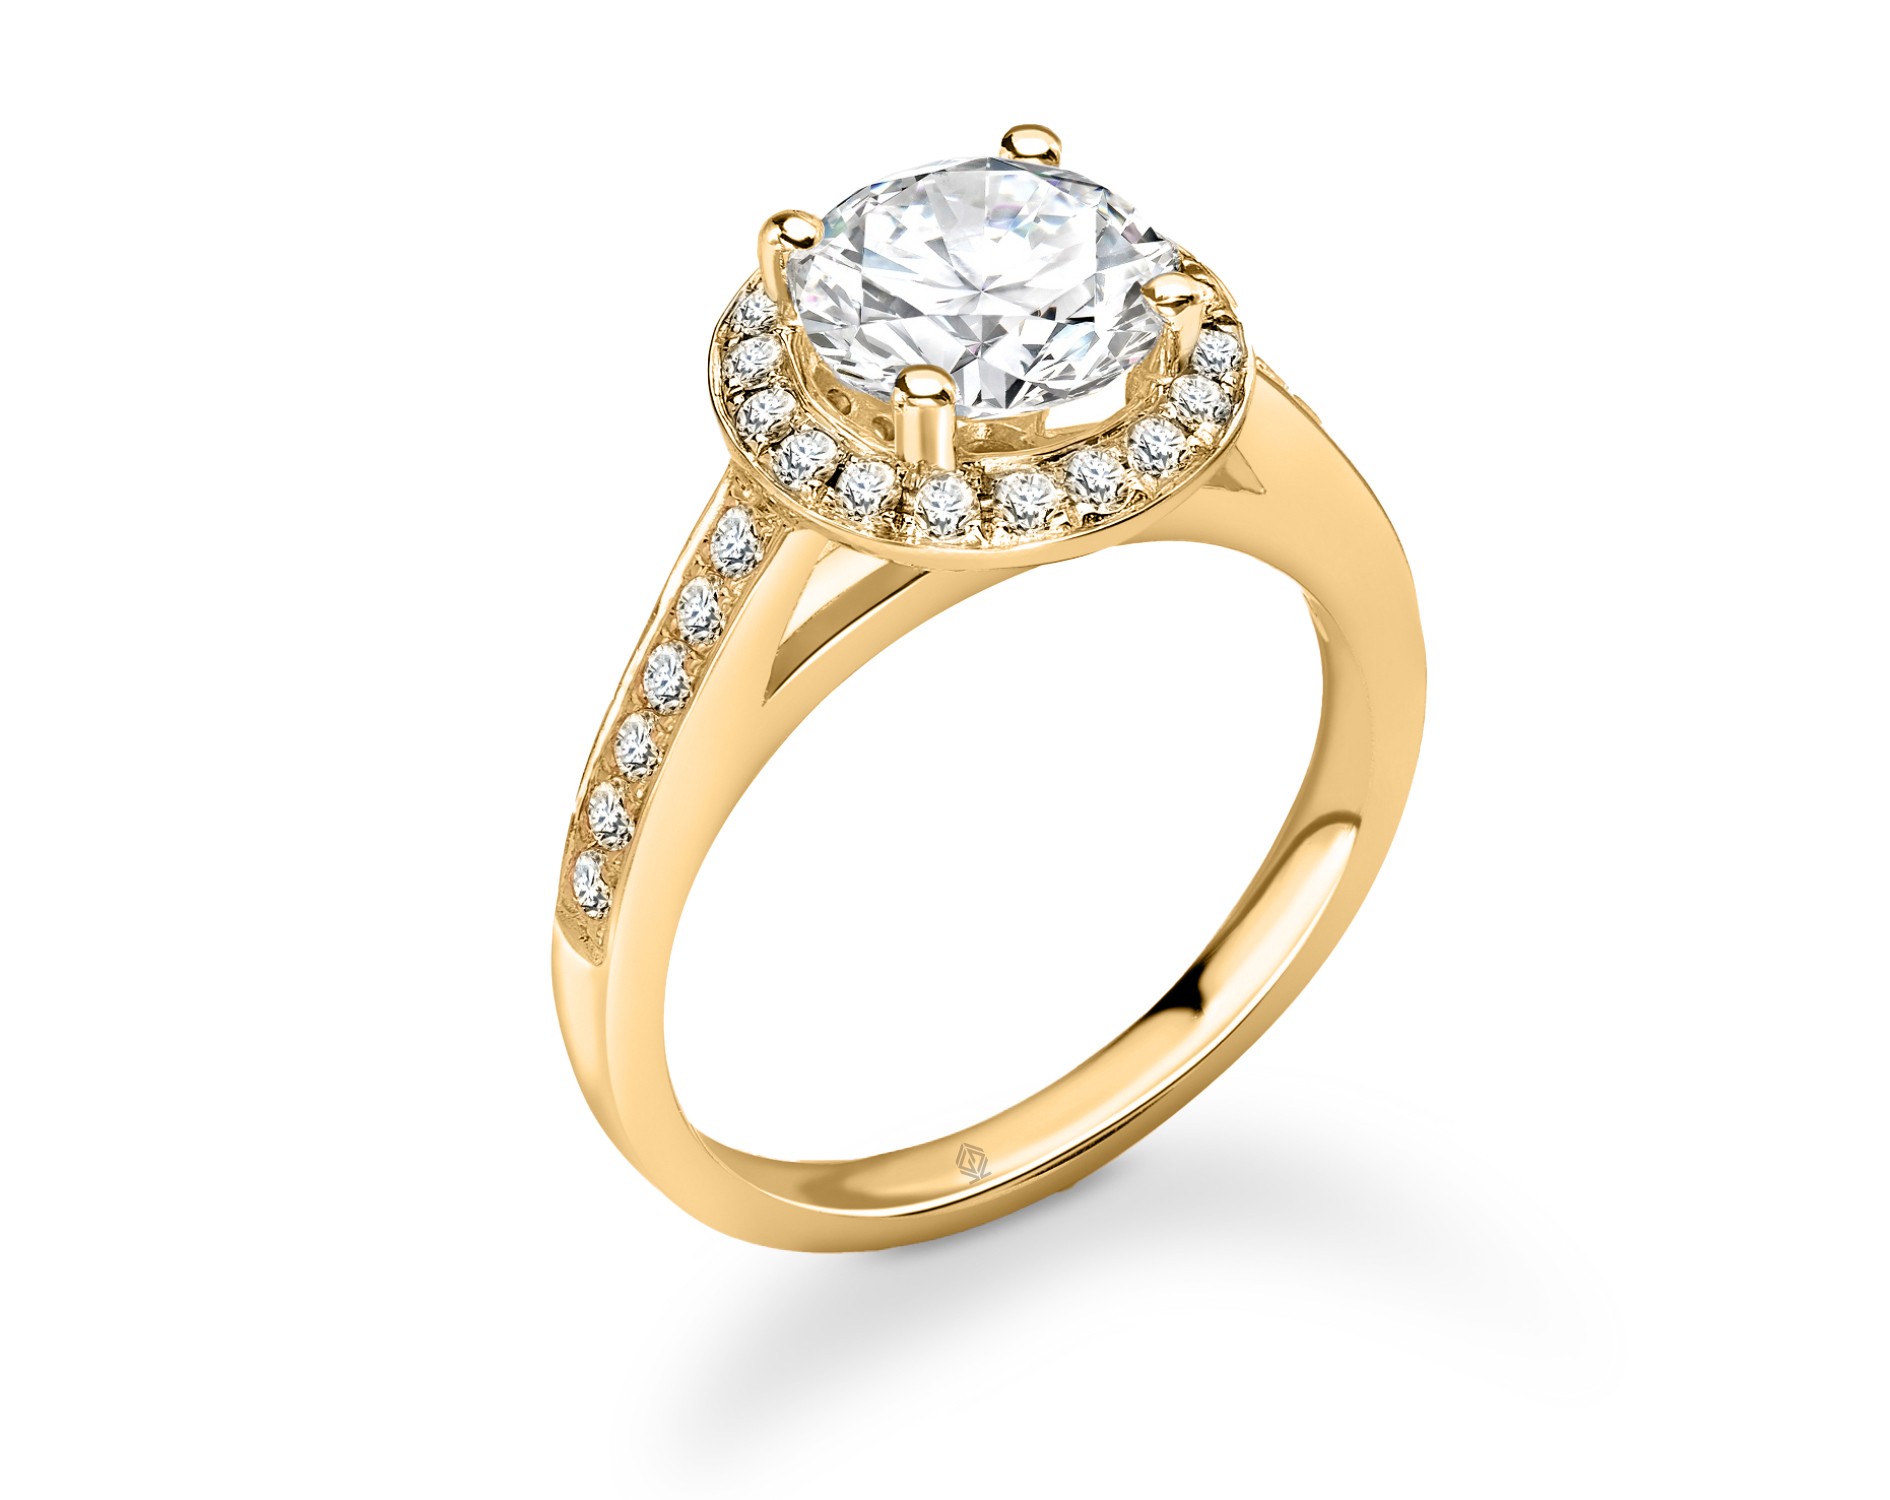 18K YELLOW GOLD ROUND CUT HALO DIAMOND RING WITH SIDE STONES CHANNEL SET